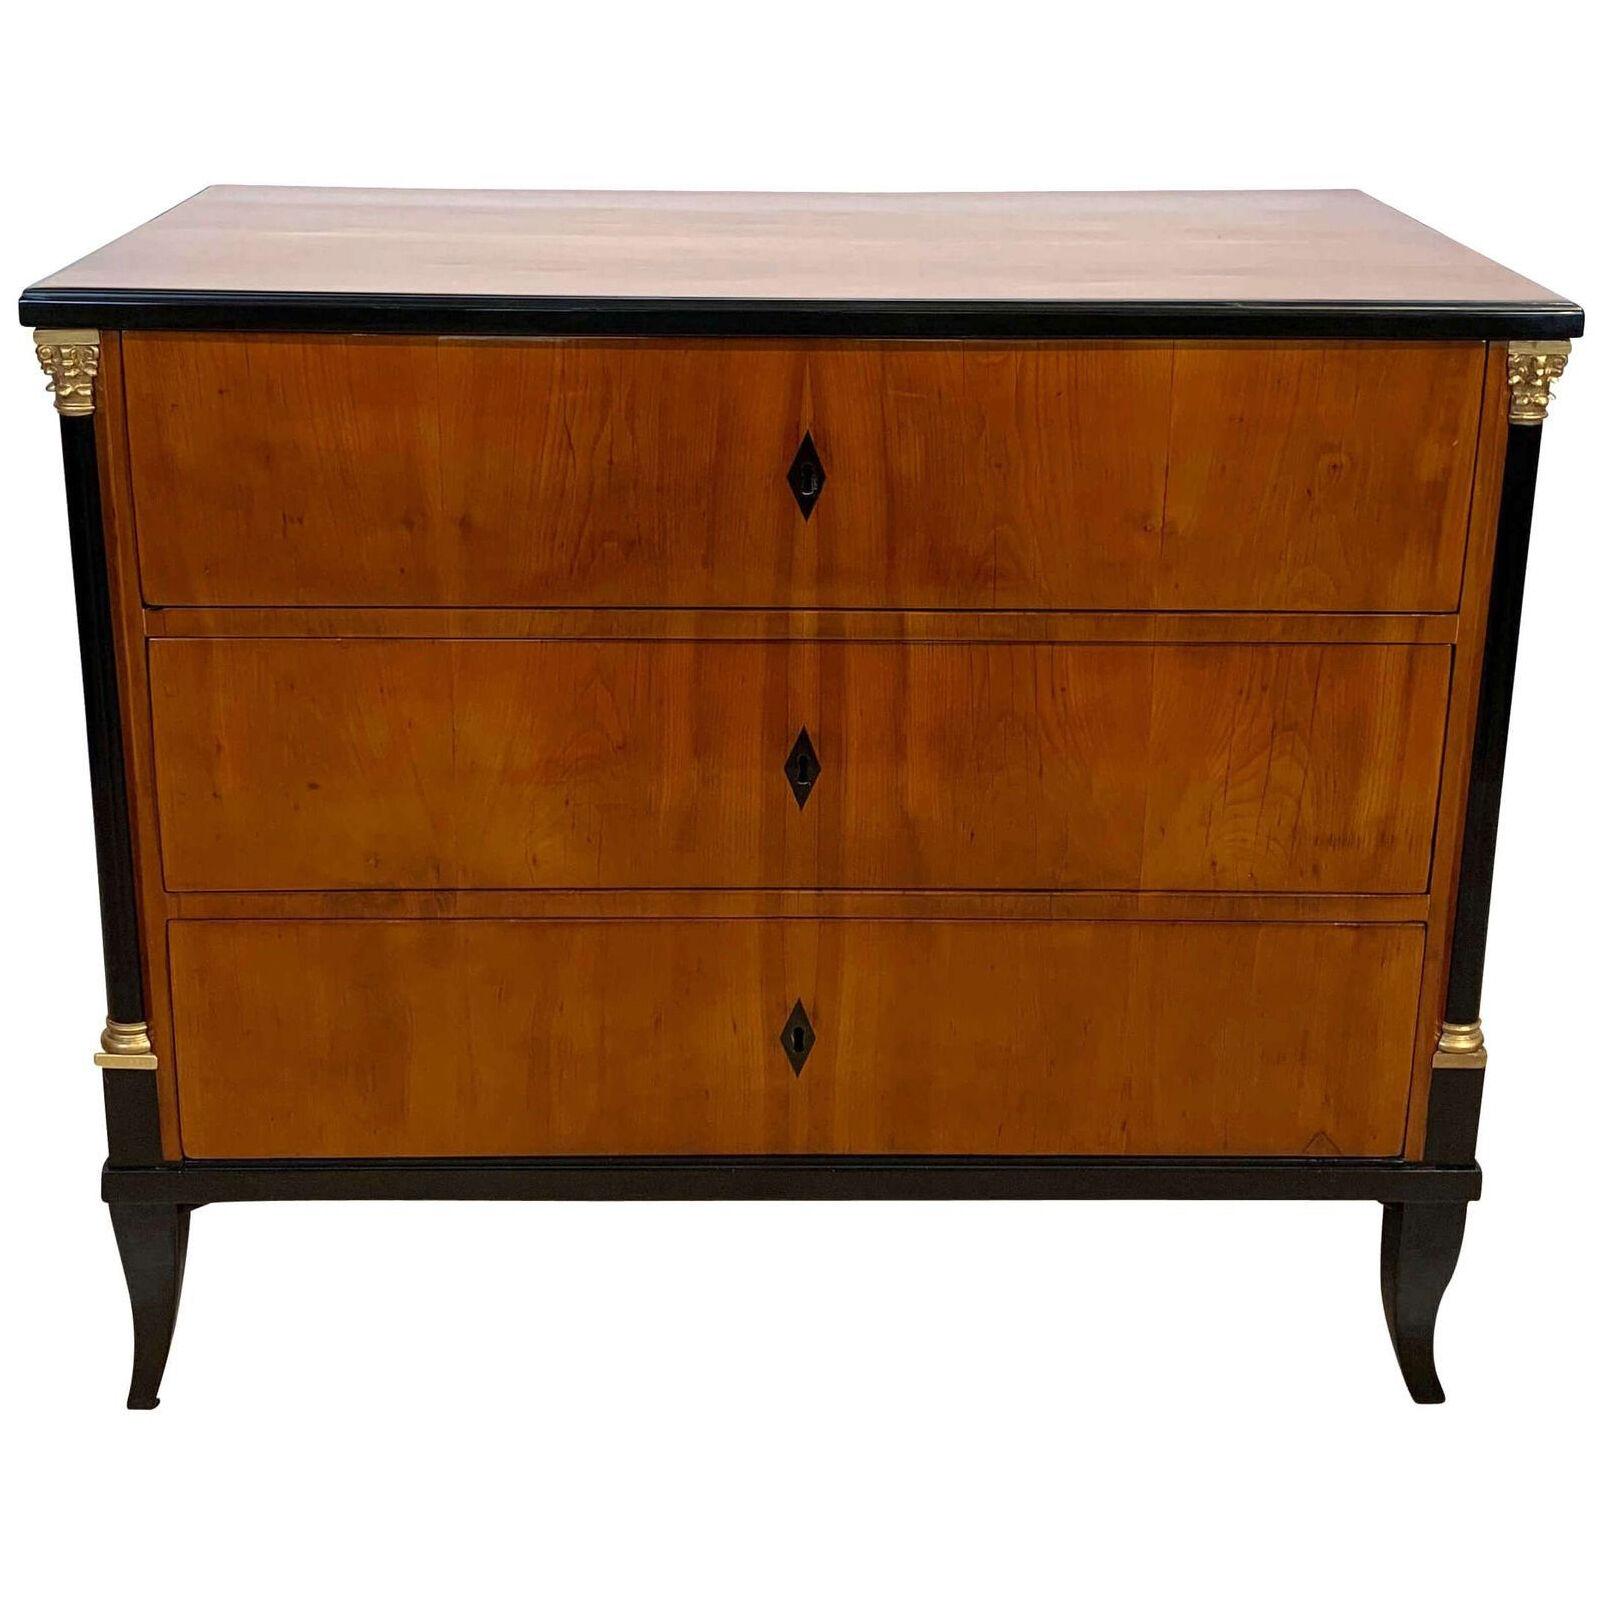 Small Commode / Chest of Drawers, Cherry Veneer, South Germany circa 1820